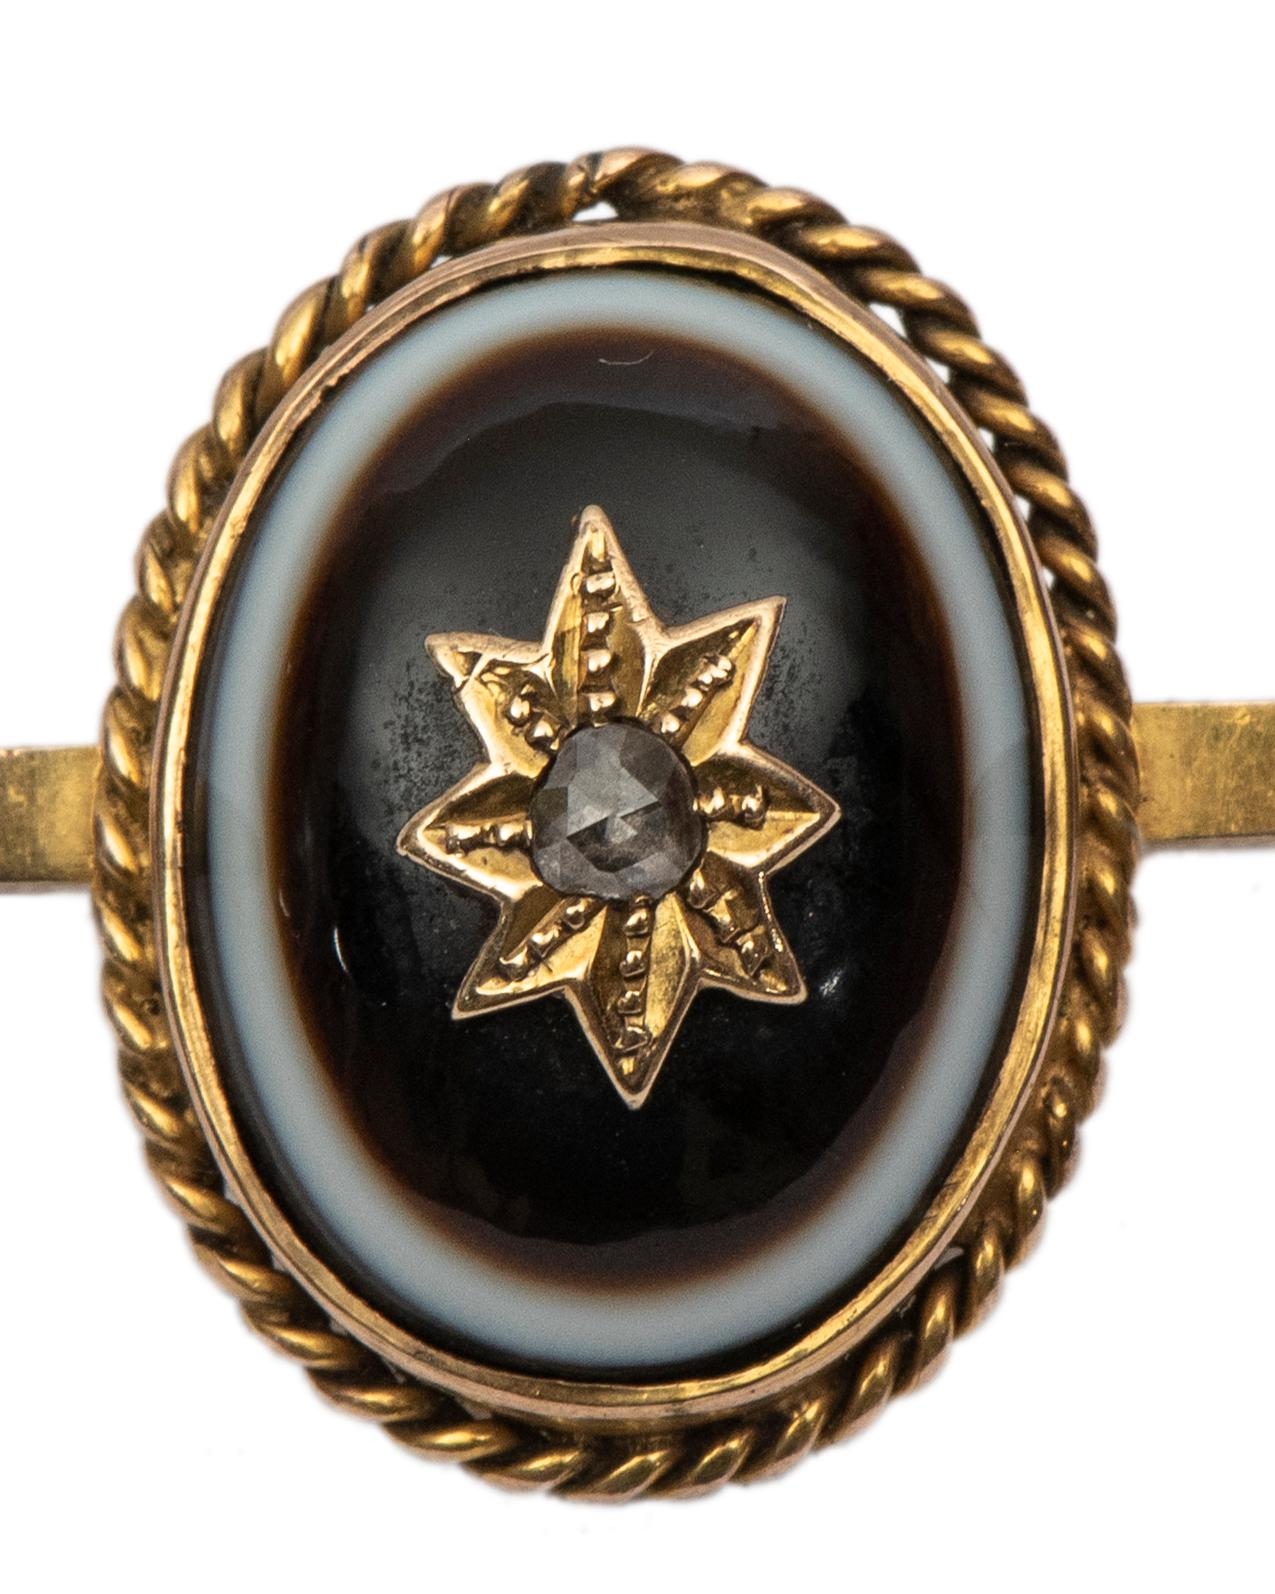 This late Victorian bar pin is set with an oval bull's eye banded agate centered by a rose-cut diamond on a gold star motif, within a twisted ropework border.

-2 1/4 in (5.5 cm) long, oval bezel: 3/4 in. (2 cm) long 

Circa 1890, stamped 9ct